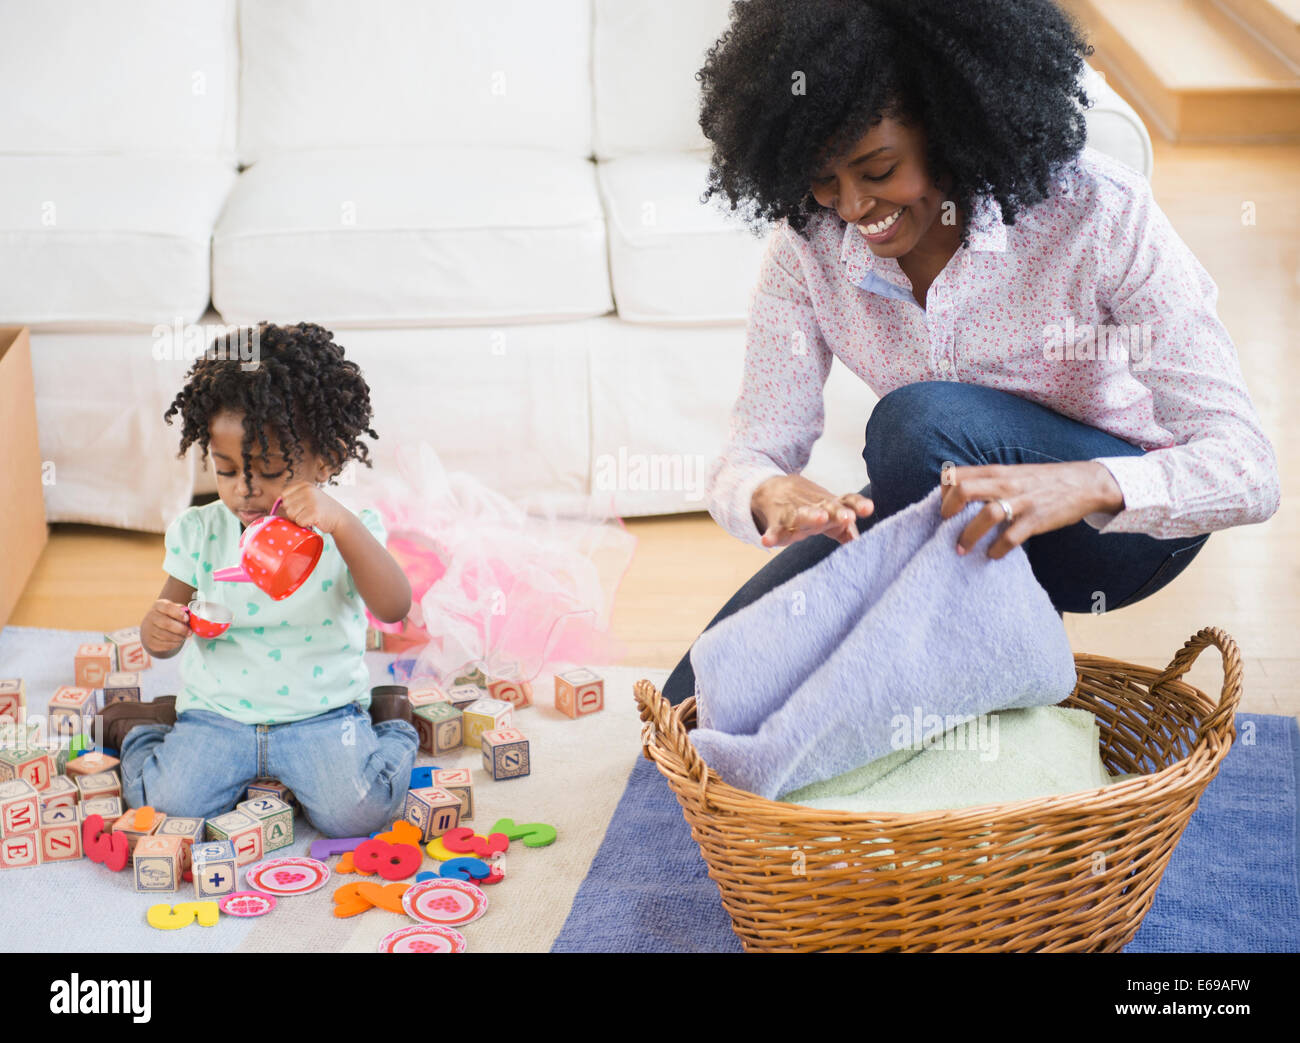 Mother folding laundry while daughter plays Stock Photo